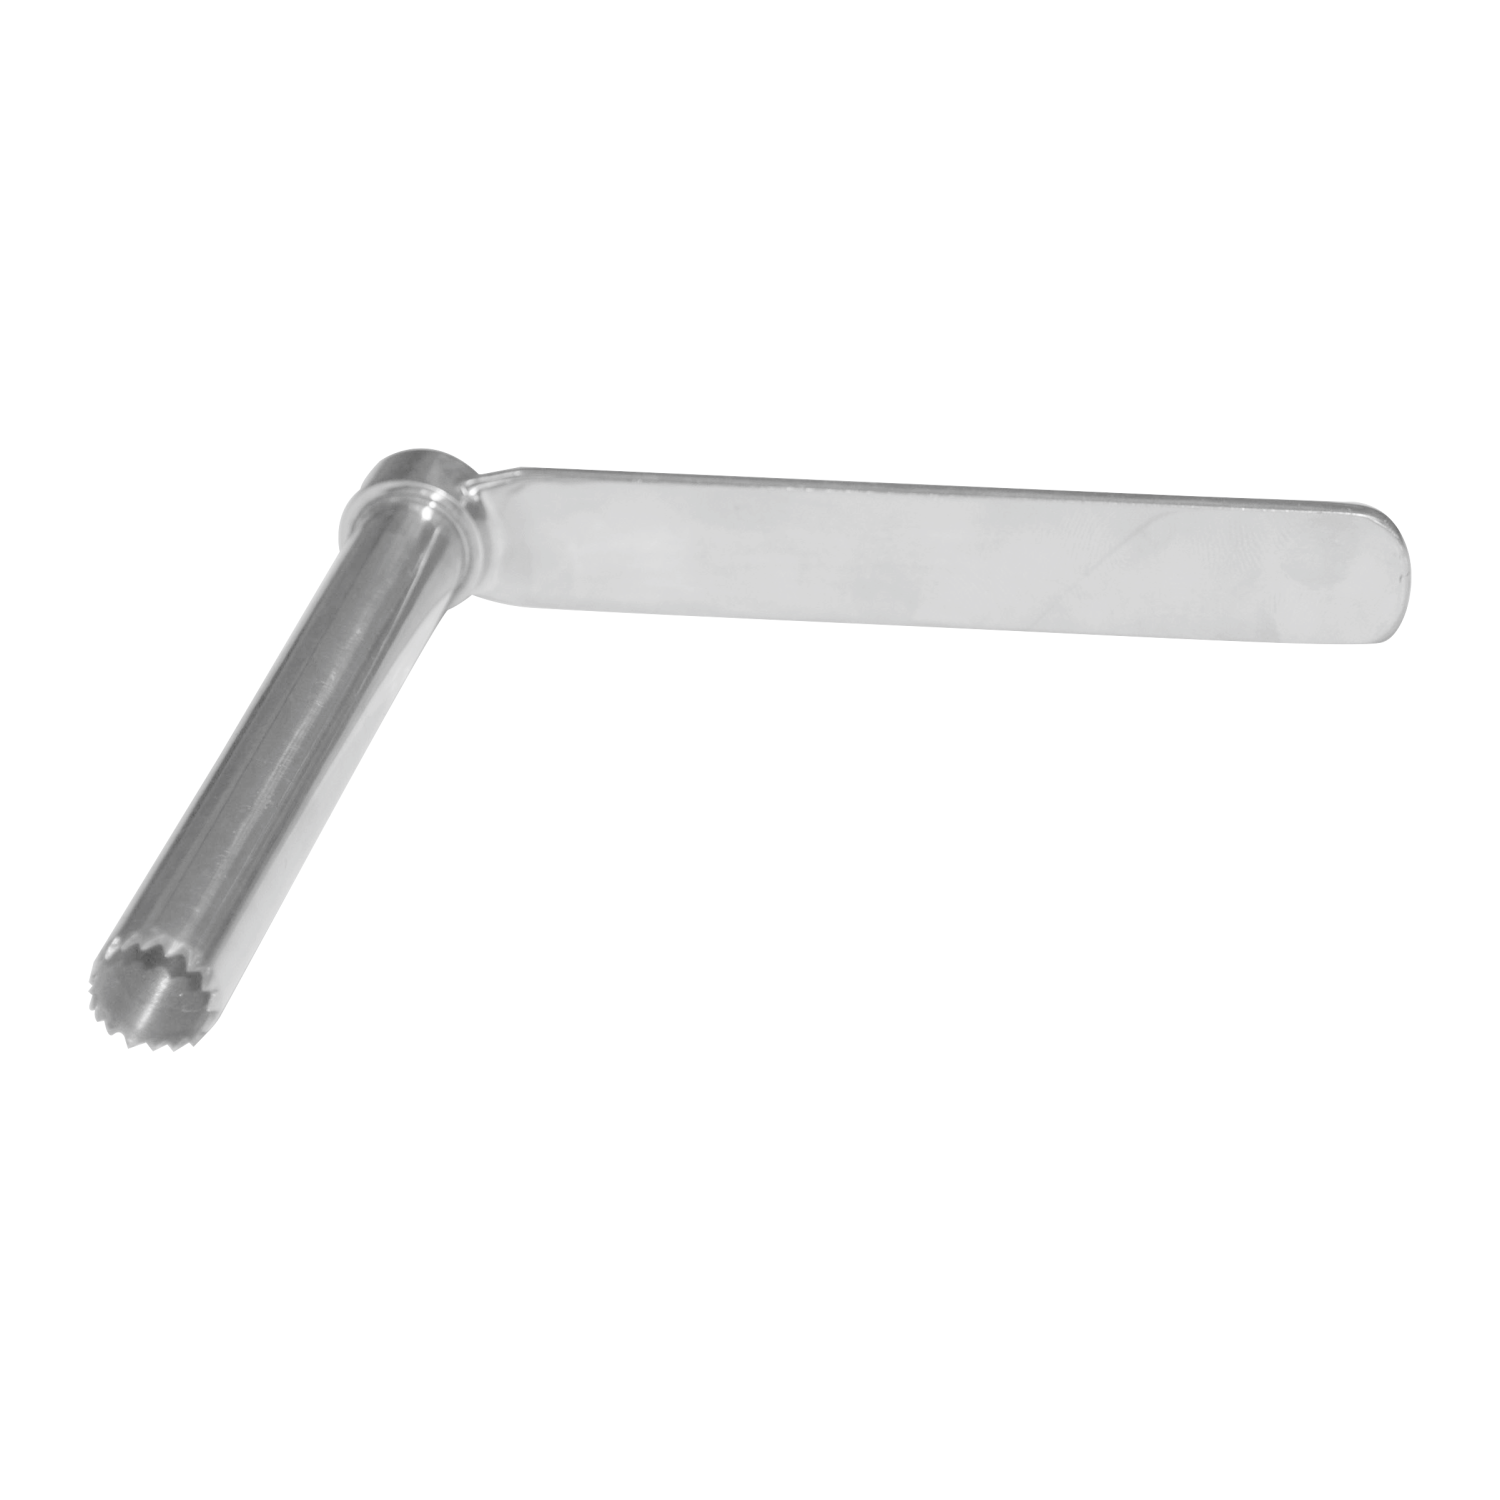 Protection-Sleeve-for-Proximal-Reamer-13mm